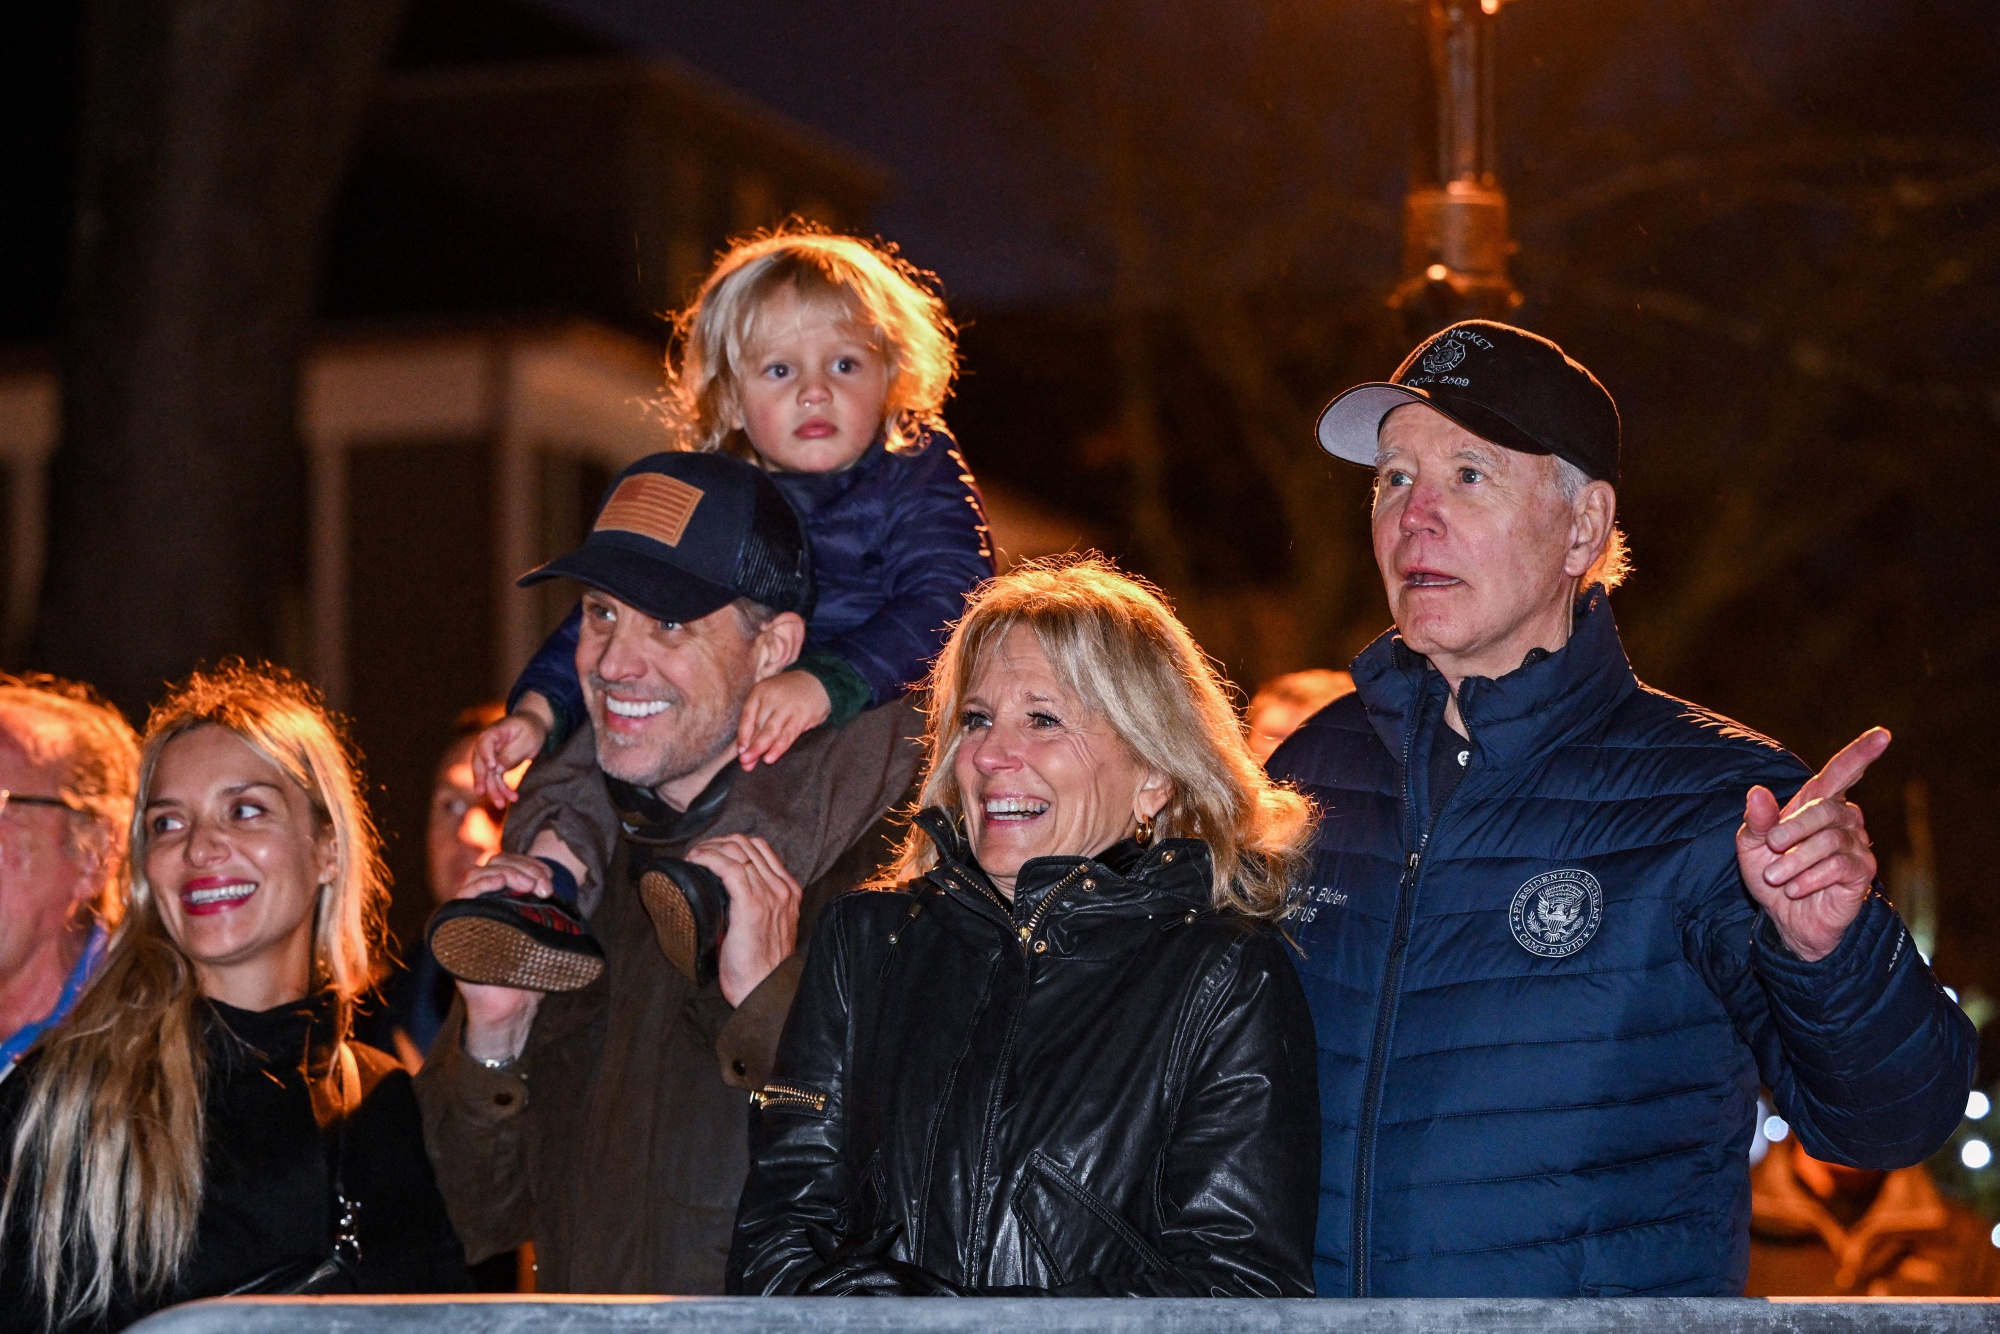 Here's what the Bidens have been up to on Nantucket